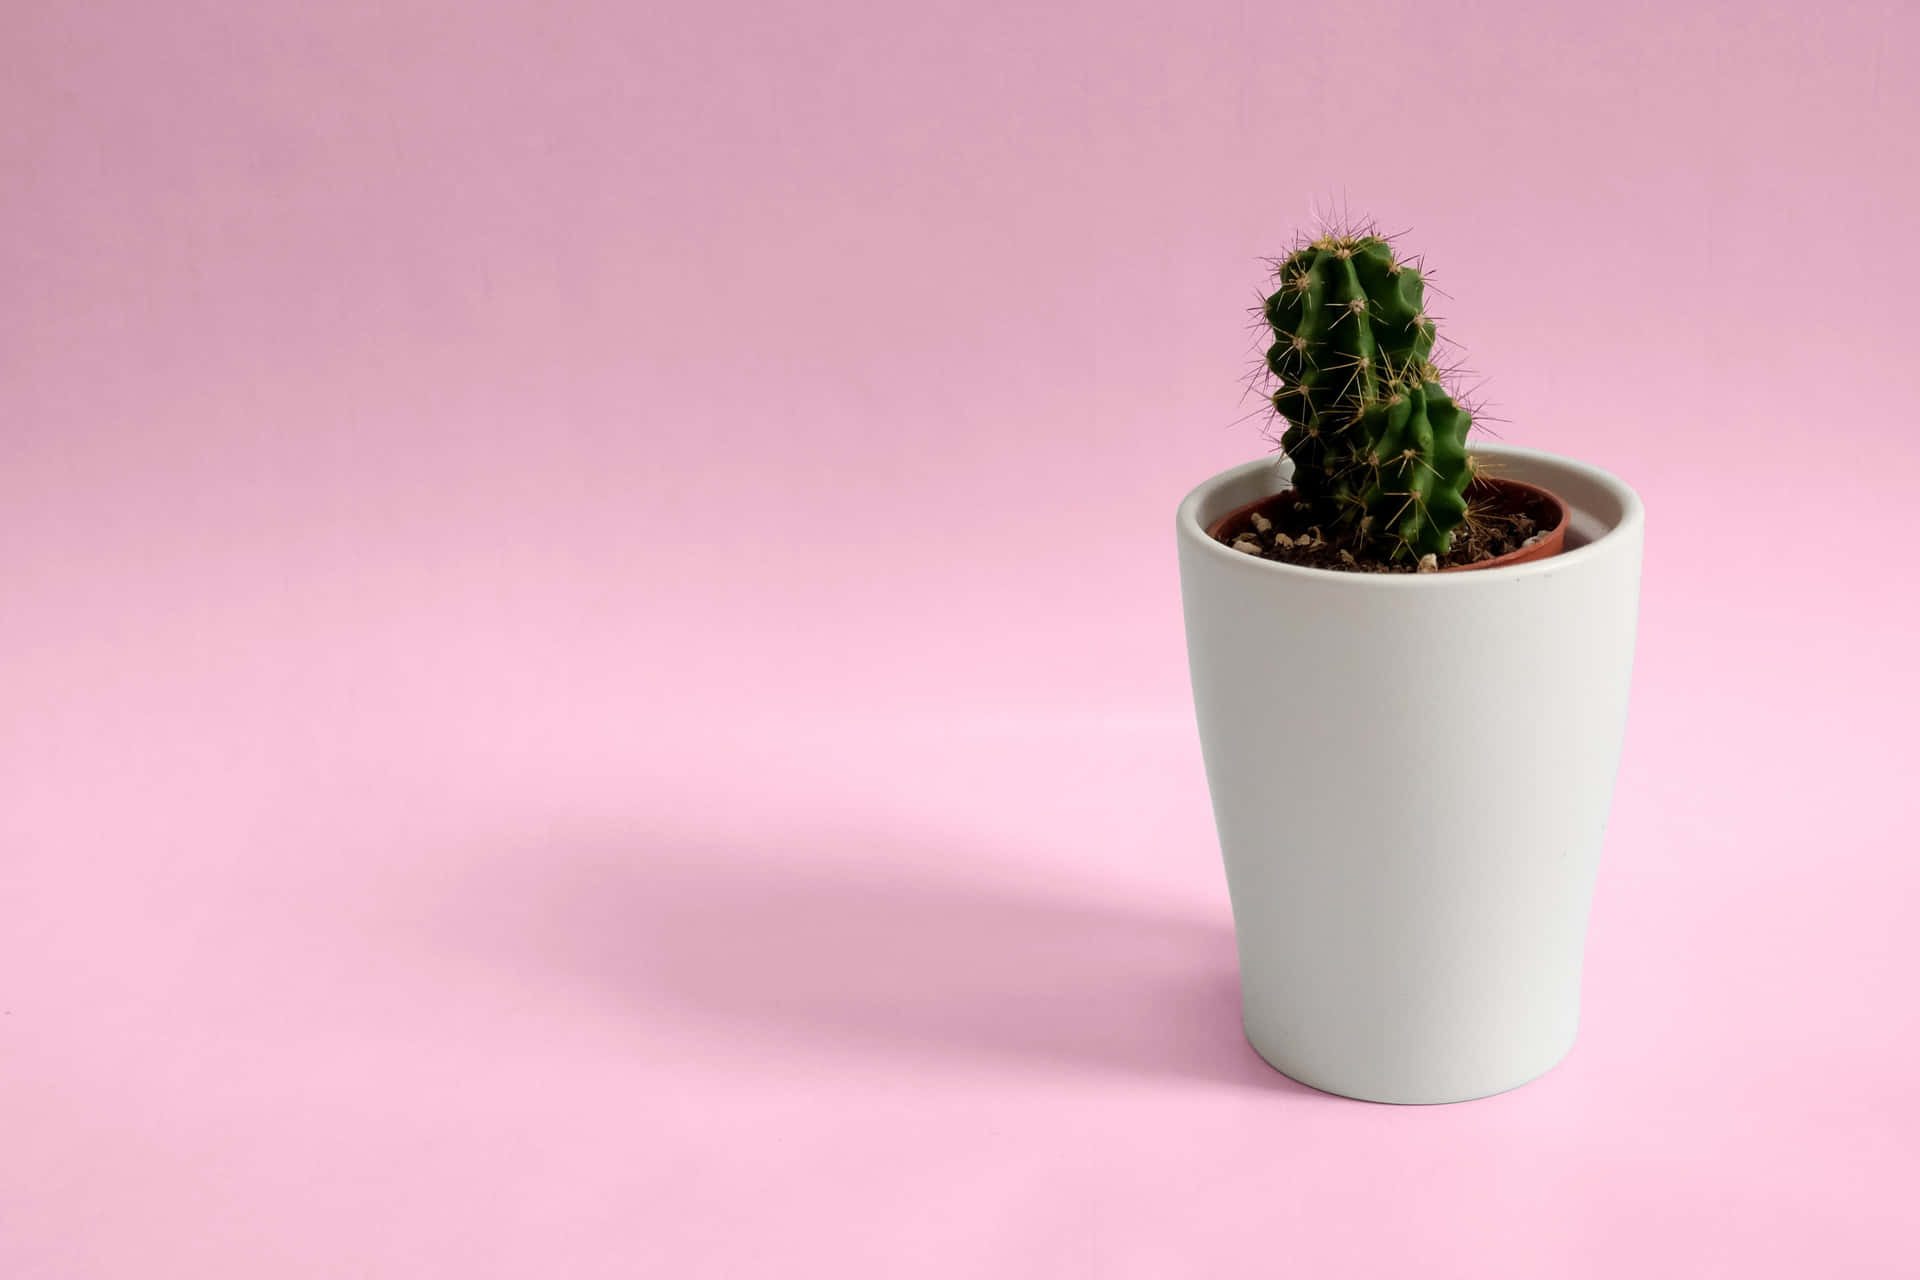 A Cactus Plant In A White Pot On A Pink Background